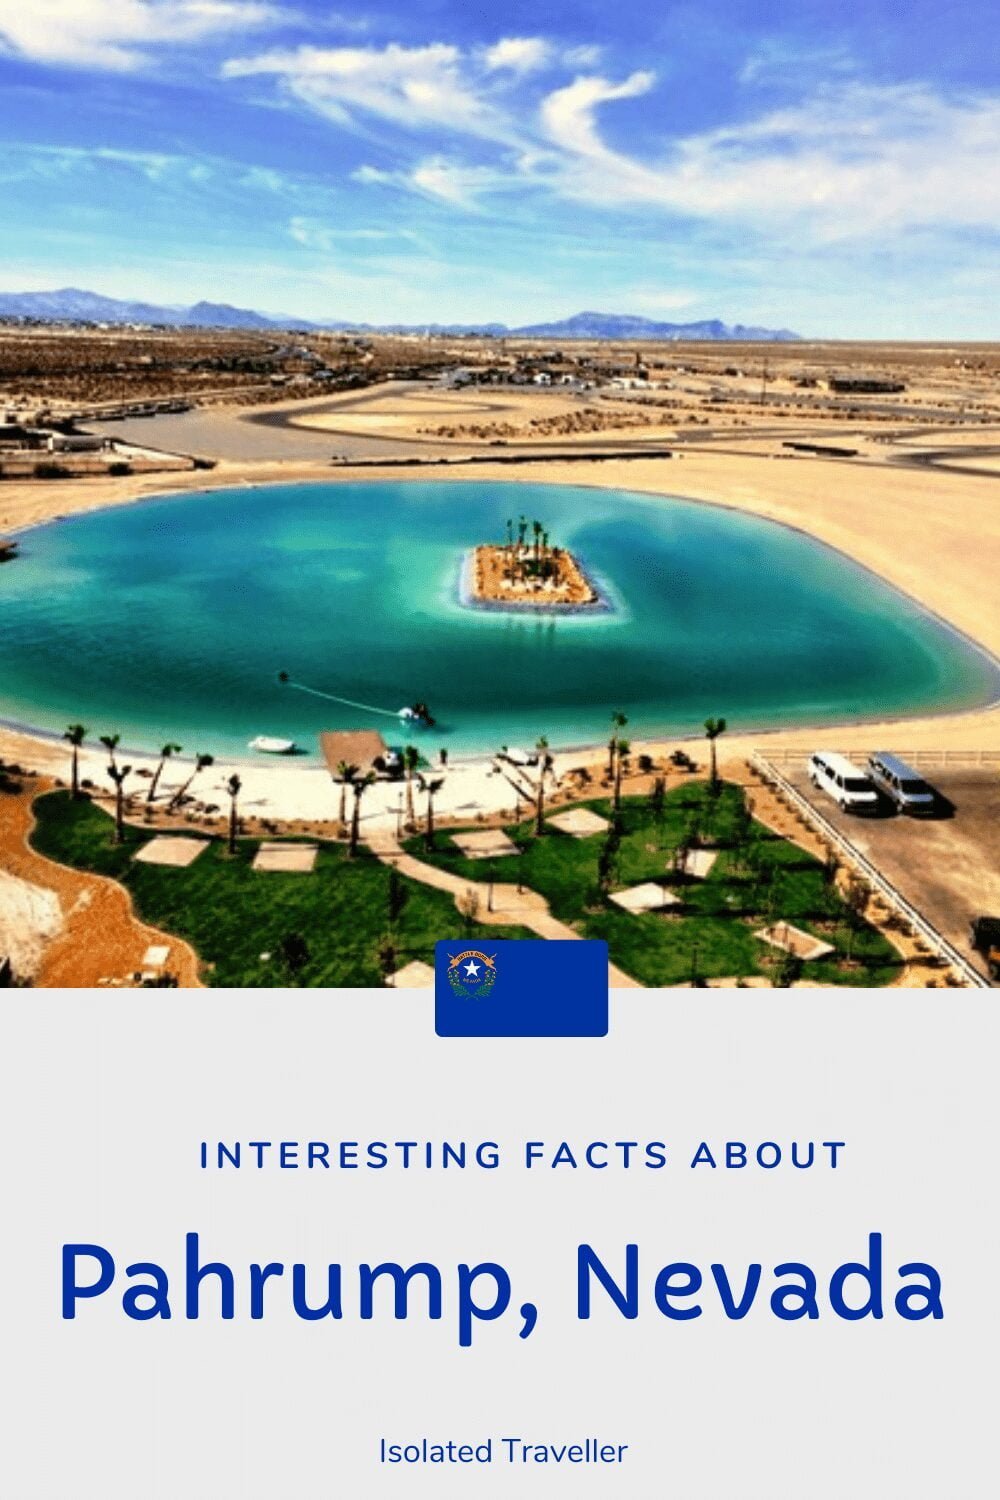 Facts About Pahrump, Nevada